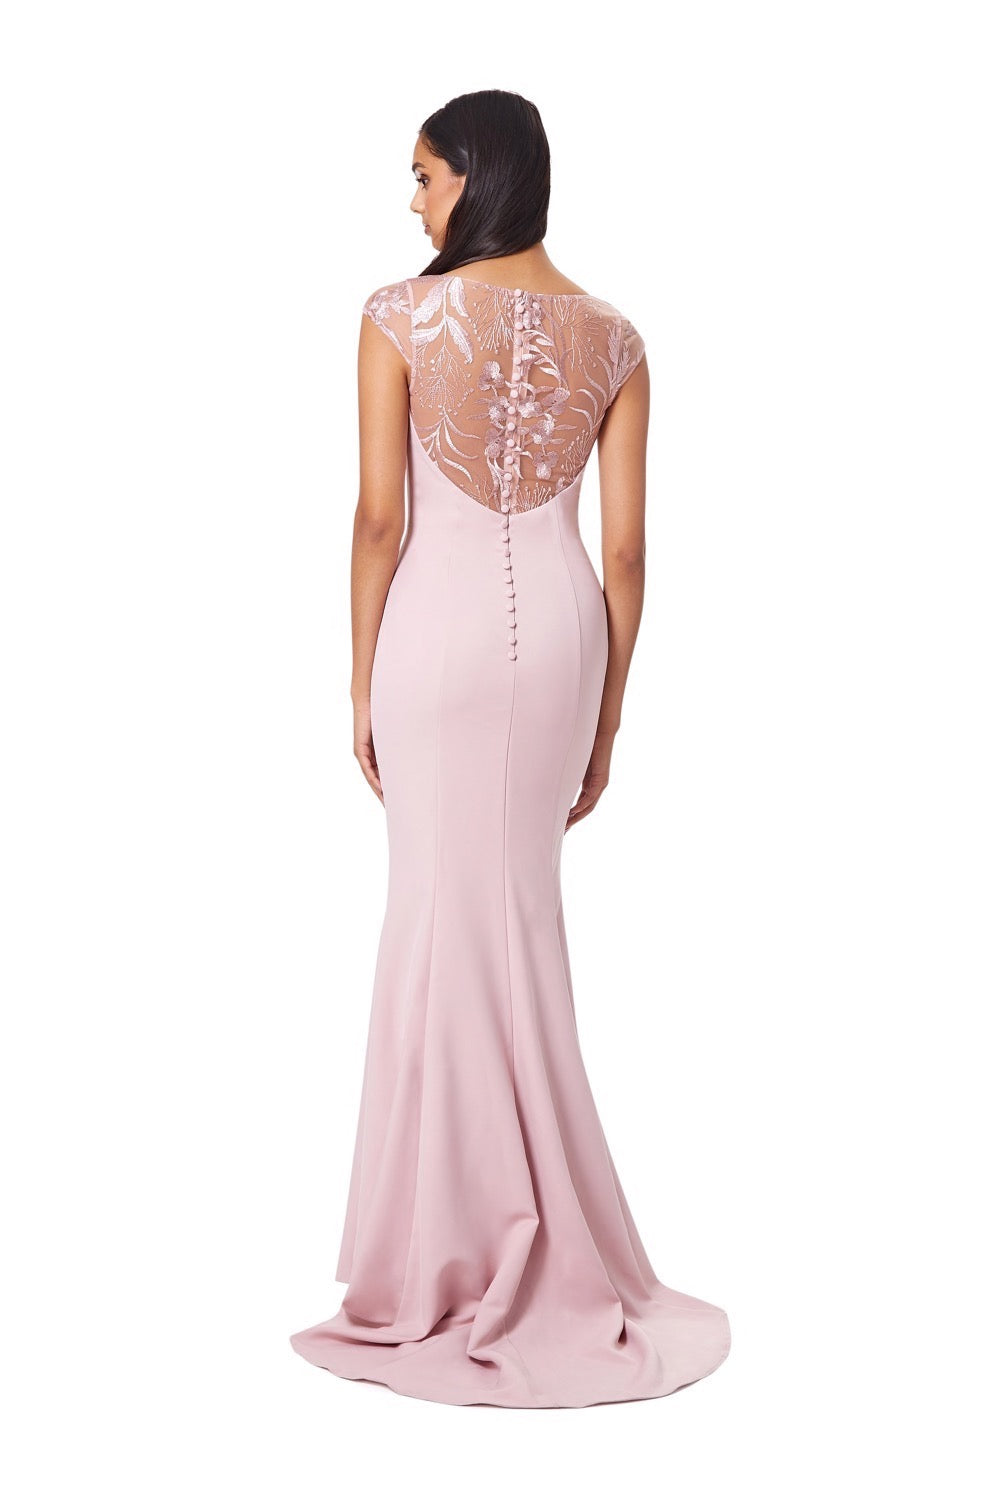 Masa Fishtail Maxi Dress with Lace Cap Sleeves and Embroidered Button Back, UK 8 / US 4 / EU 36 / Original Pink